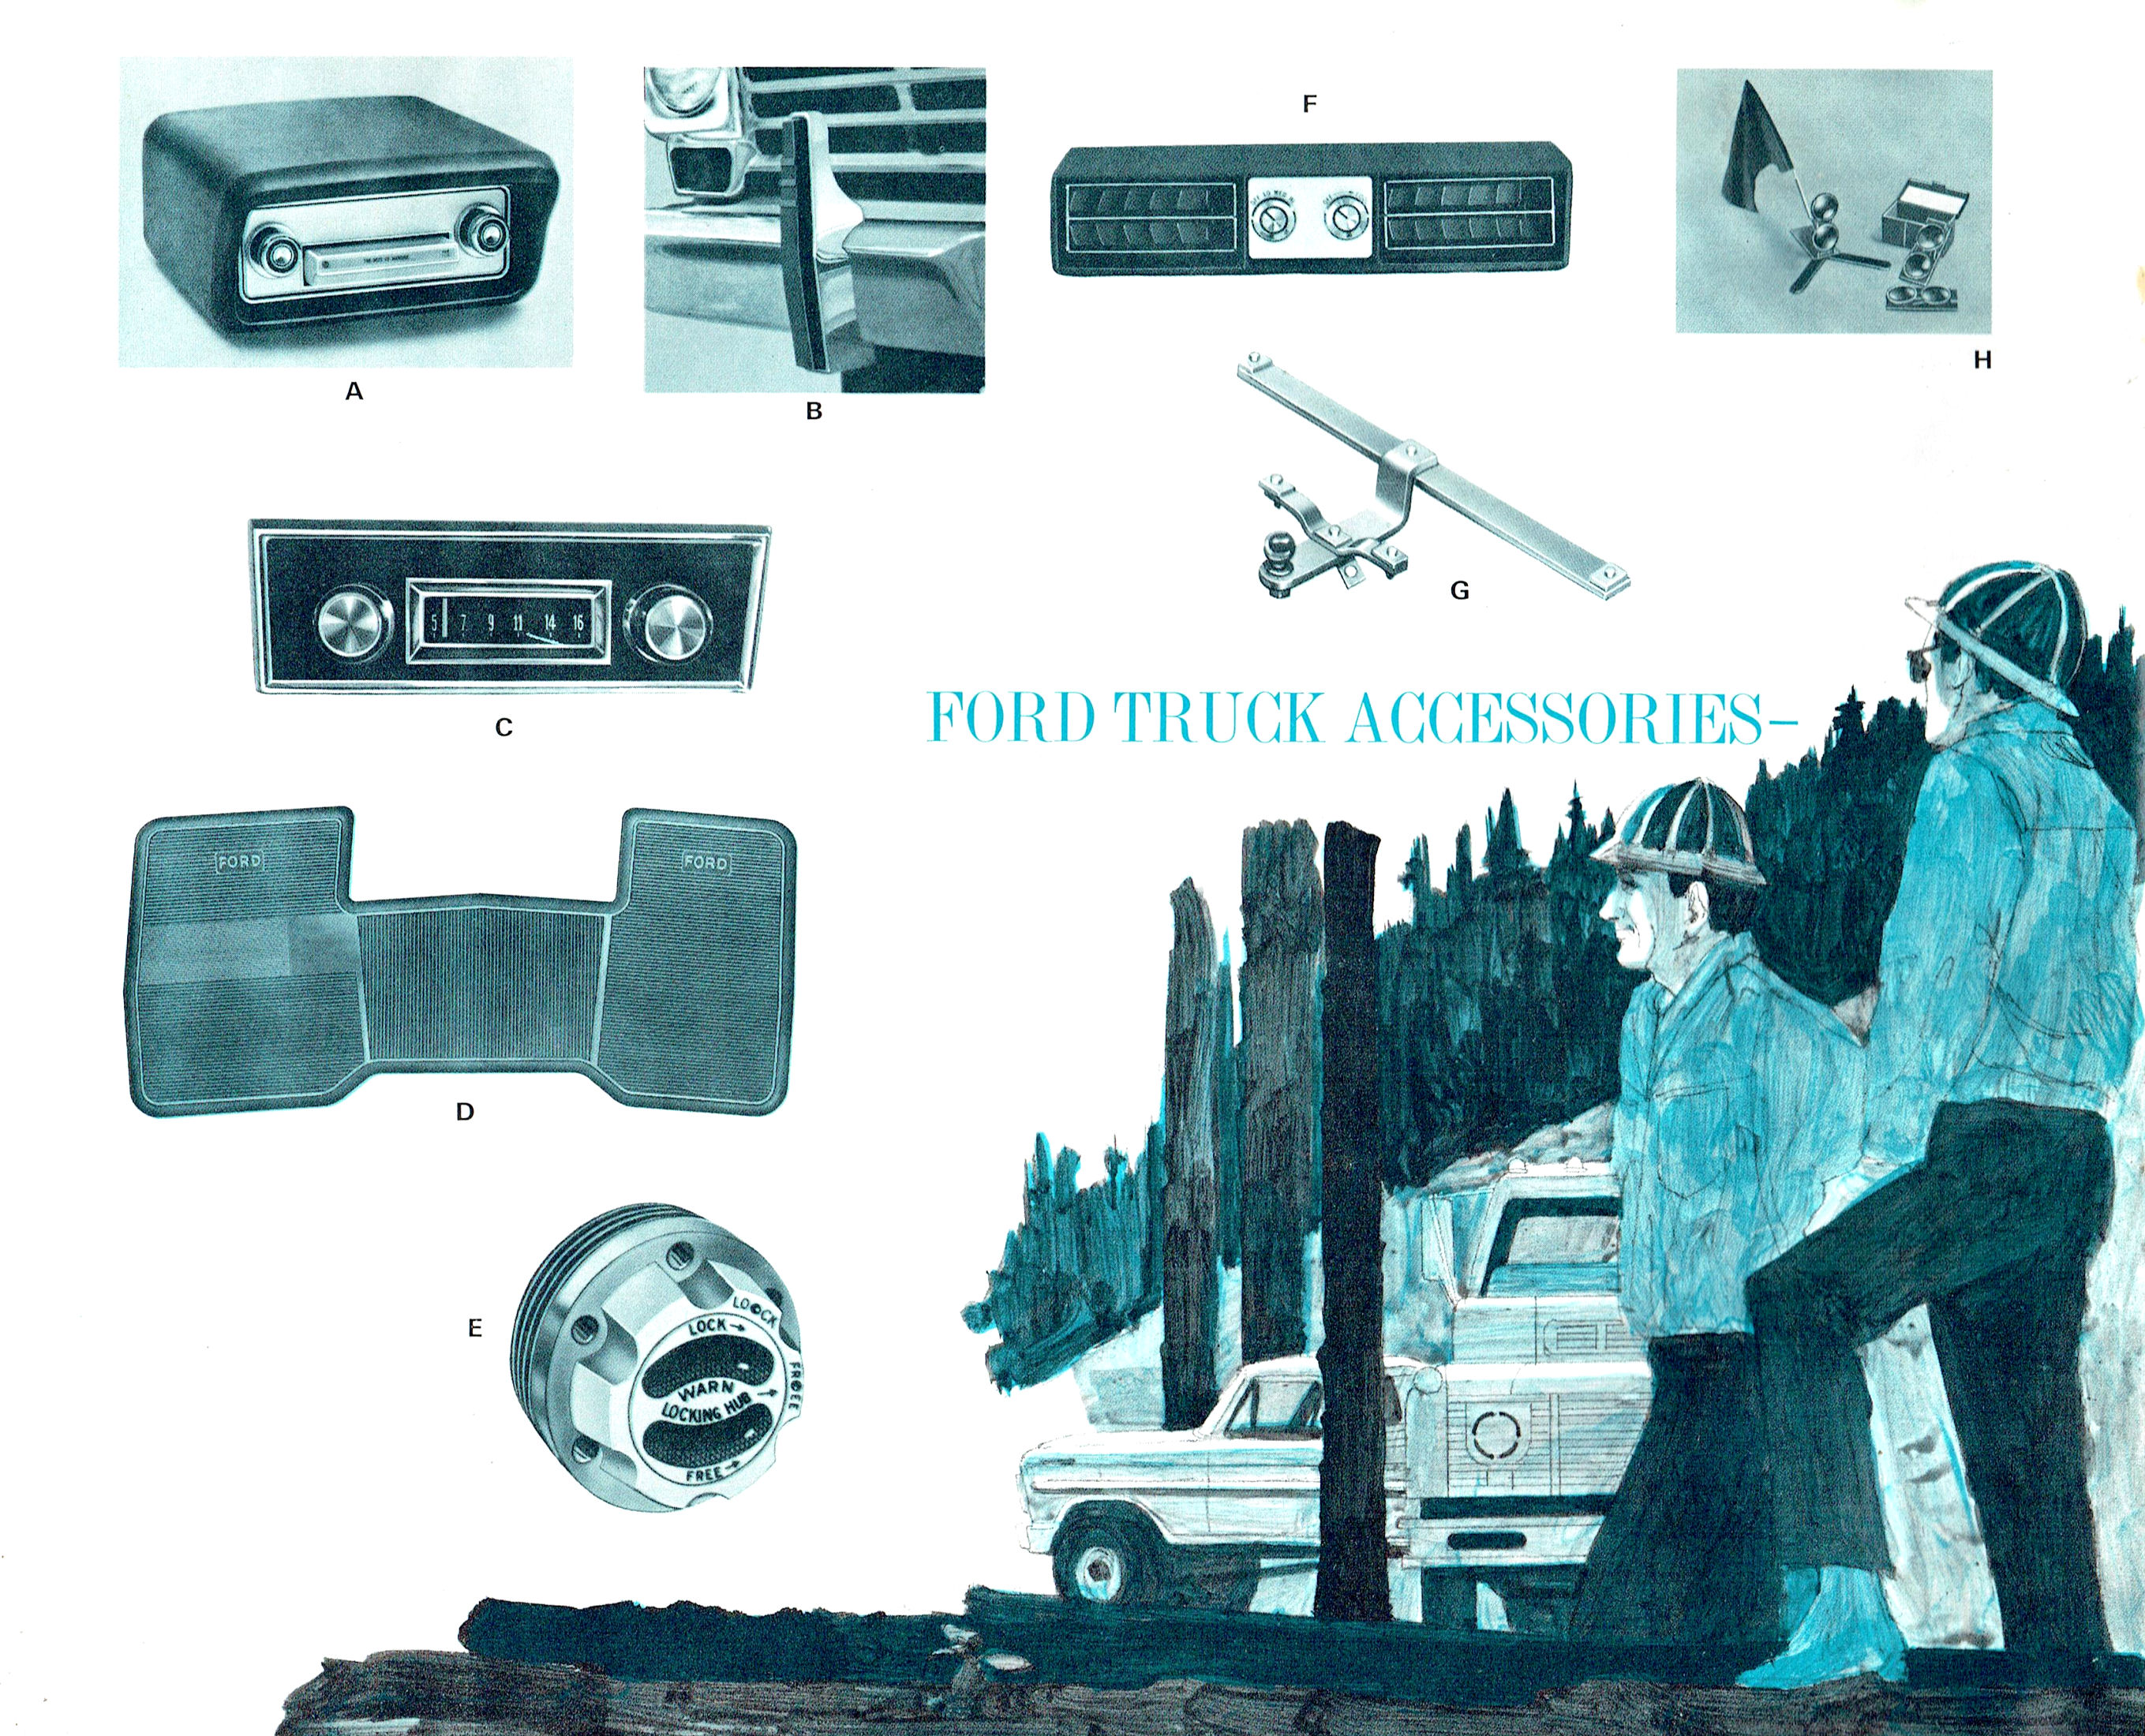 1969 Ford Truck Accessories-10